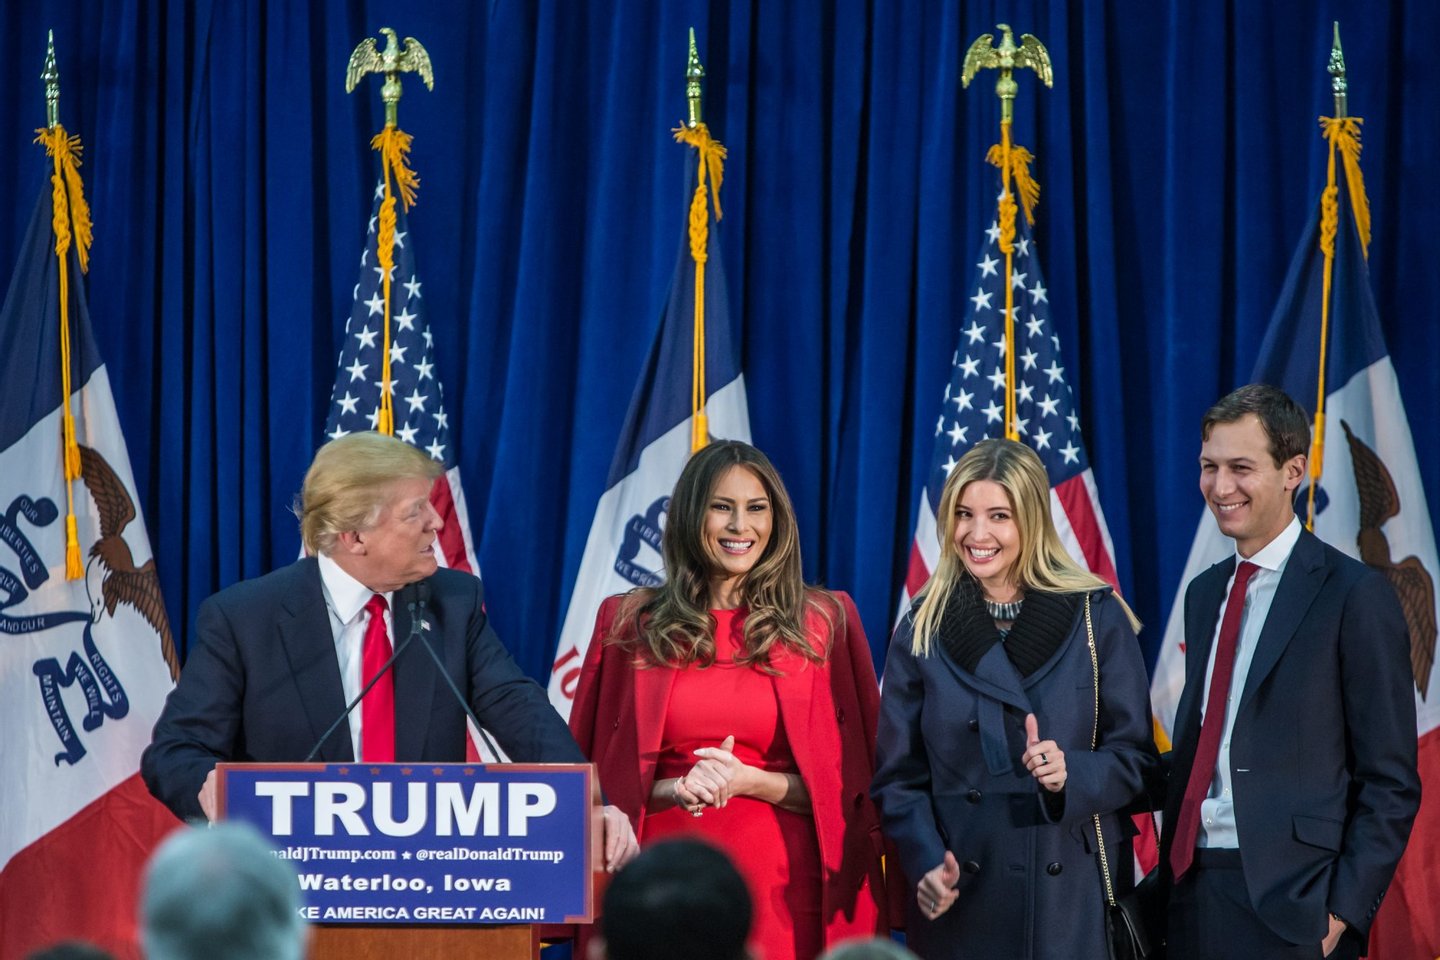 WATERLOO, IA - FEBRUARY 1: Republican presidential candidate Donald Trump (L) is joined on stage by his wife Melania Trump, daughter Ivanka Trump, and son-in-law Jared Kushner (L-R) at a campaign rally at the Ramada Waterloo Hotel and Convention Center on February 1, 2016 in Waterloo, Iowa. The Democratic and Republican Iowa Caucuses, the first step in nominating a presidential candidate from each party, will take place on February 1. (Photo by Brendan Hoffman/Getty Images)